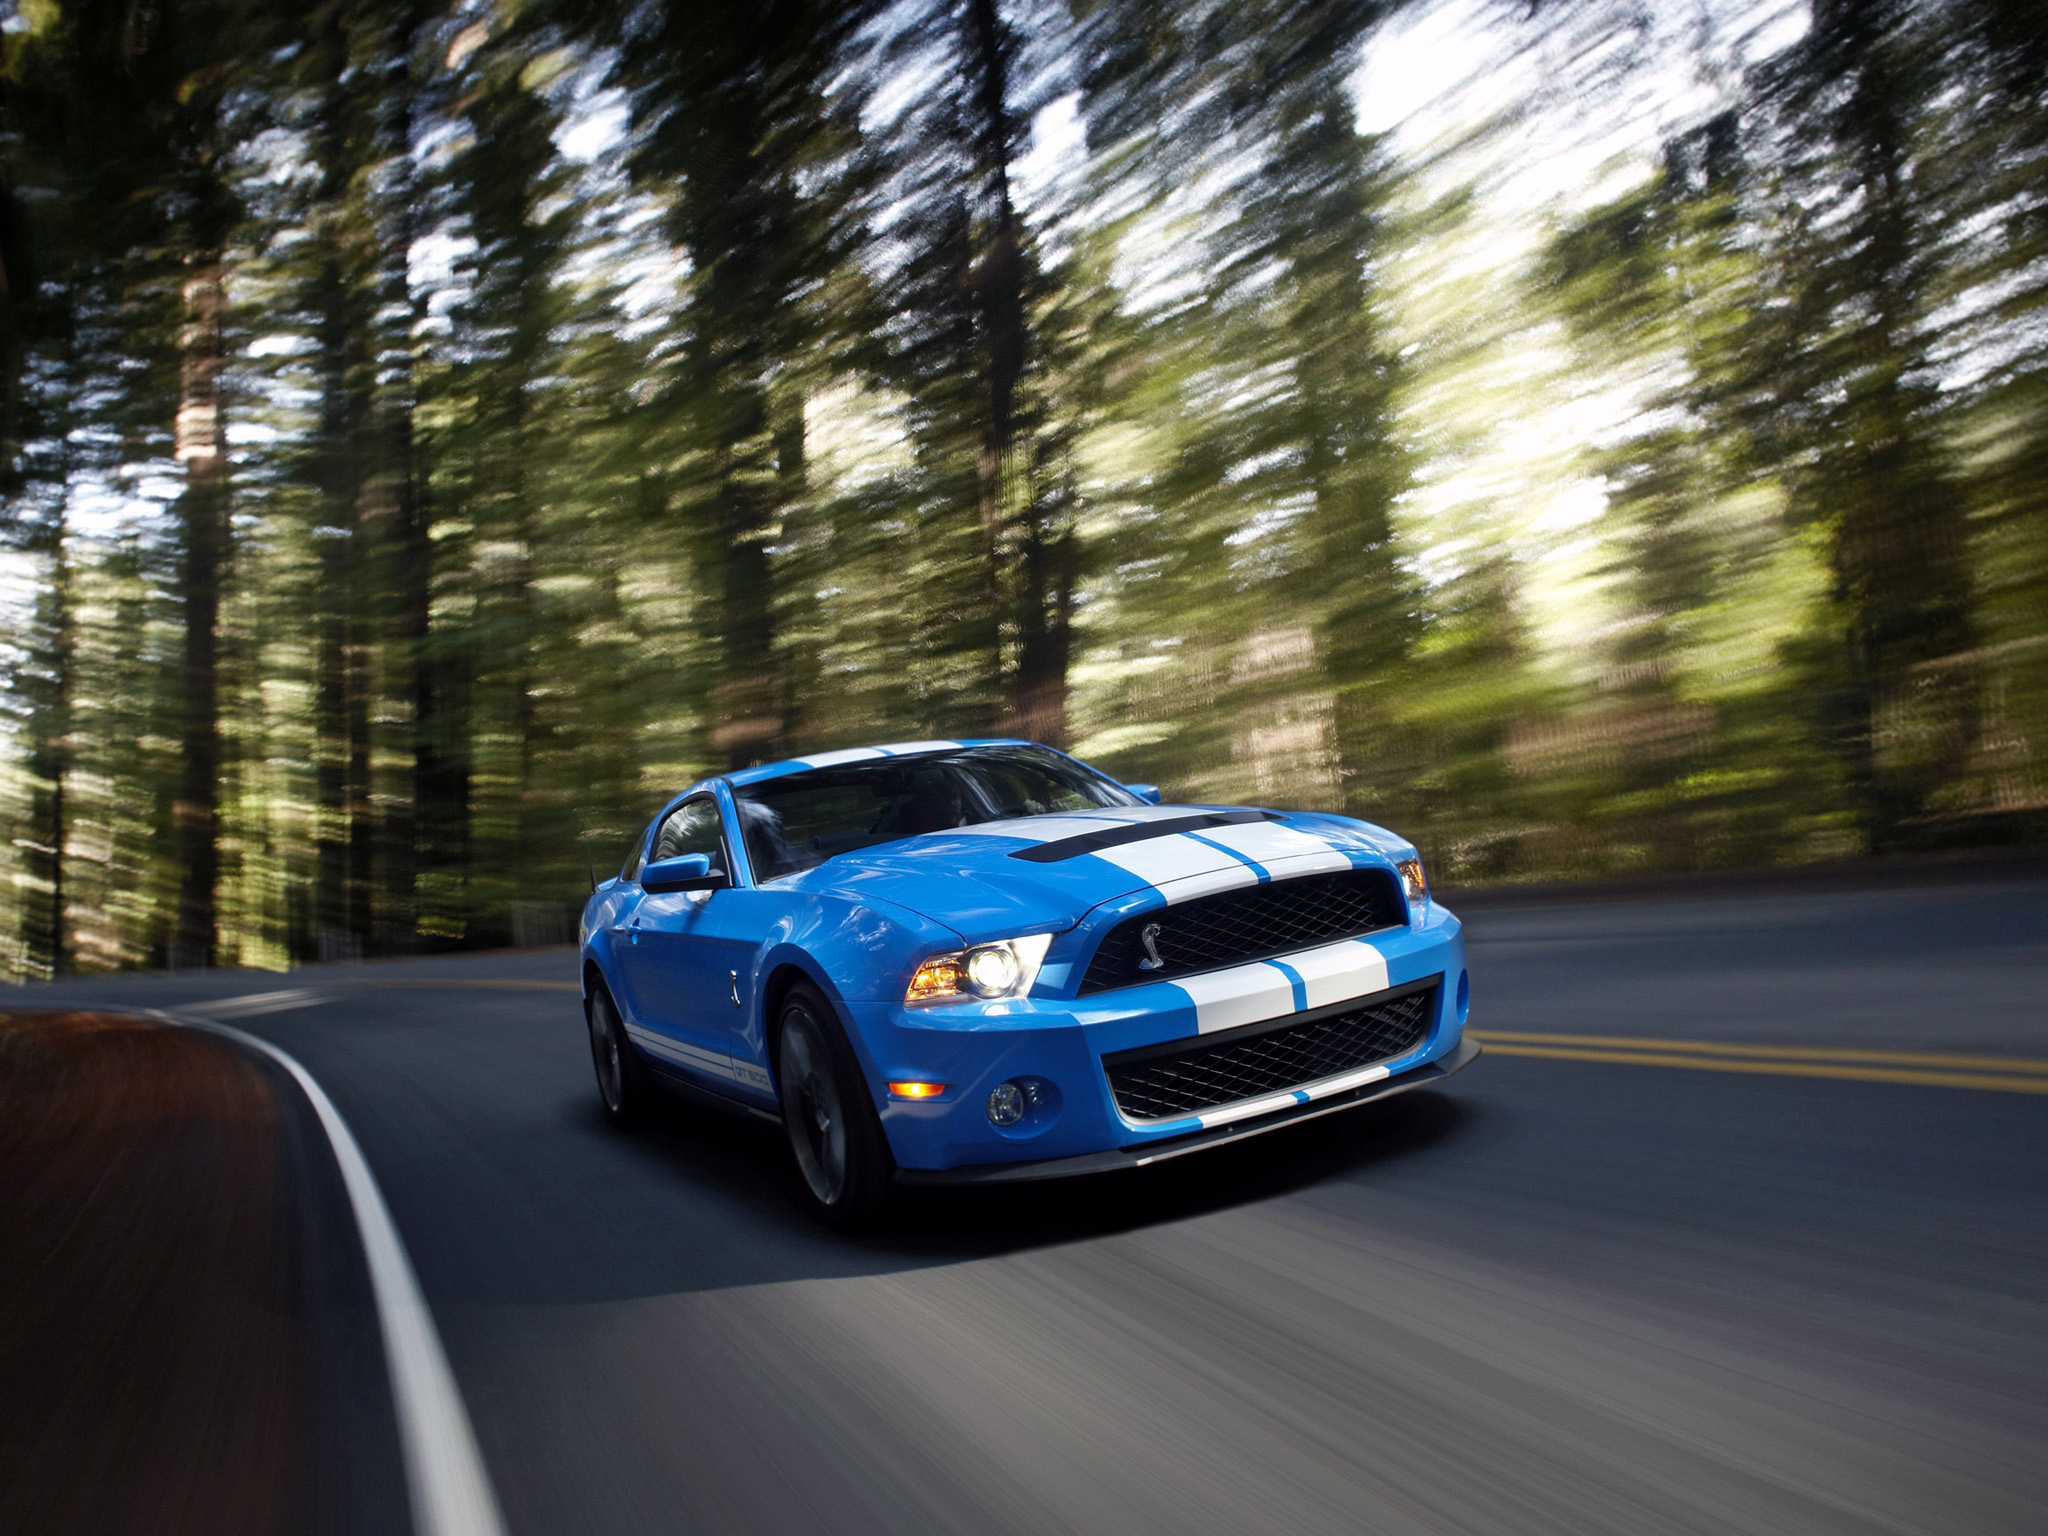 2009, Shelby, Gt500, Ford, Mustang, Muscle Wallpaper